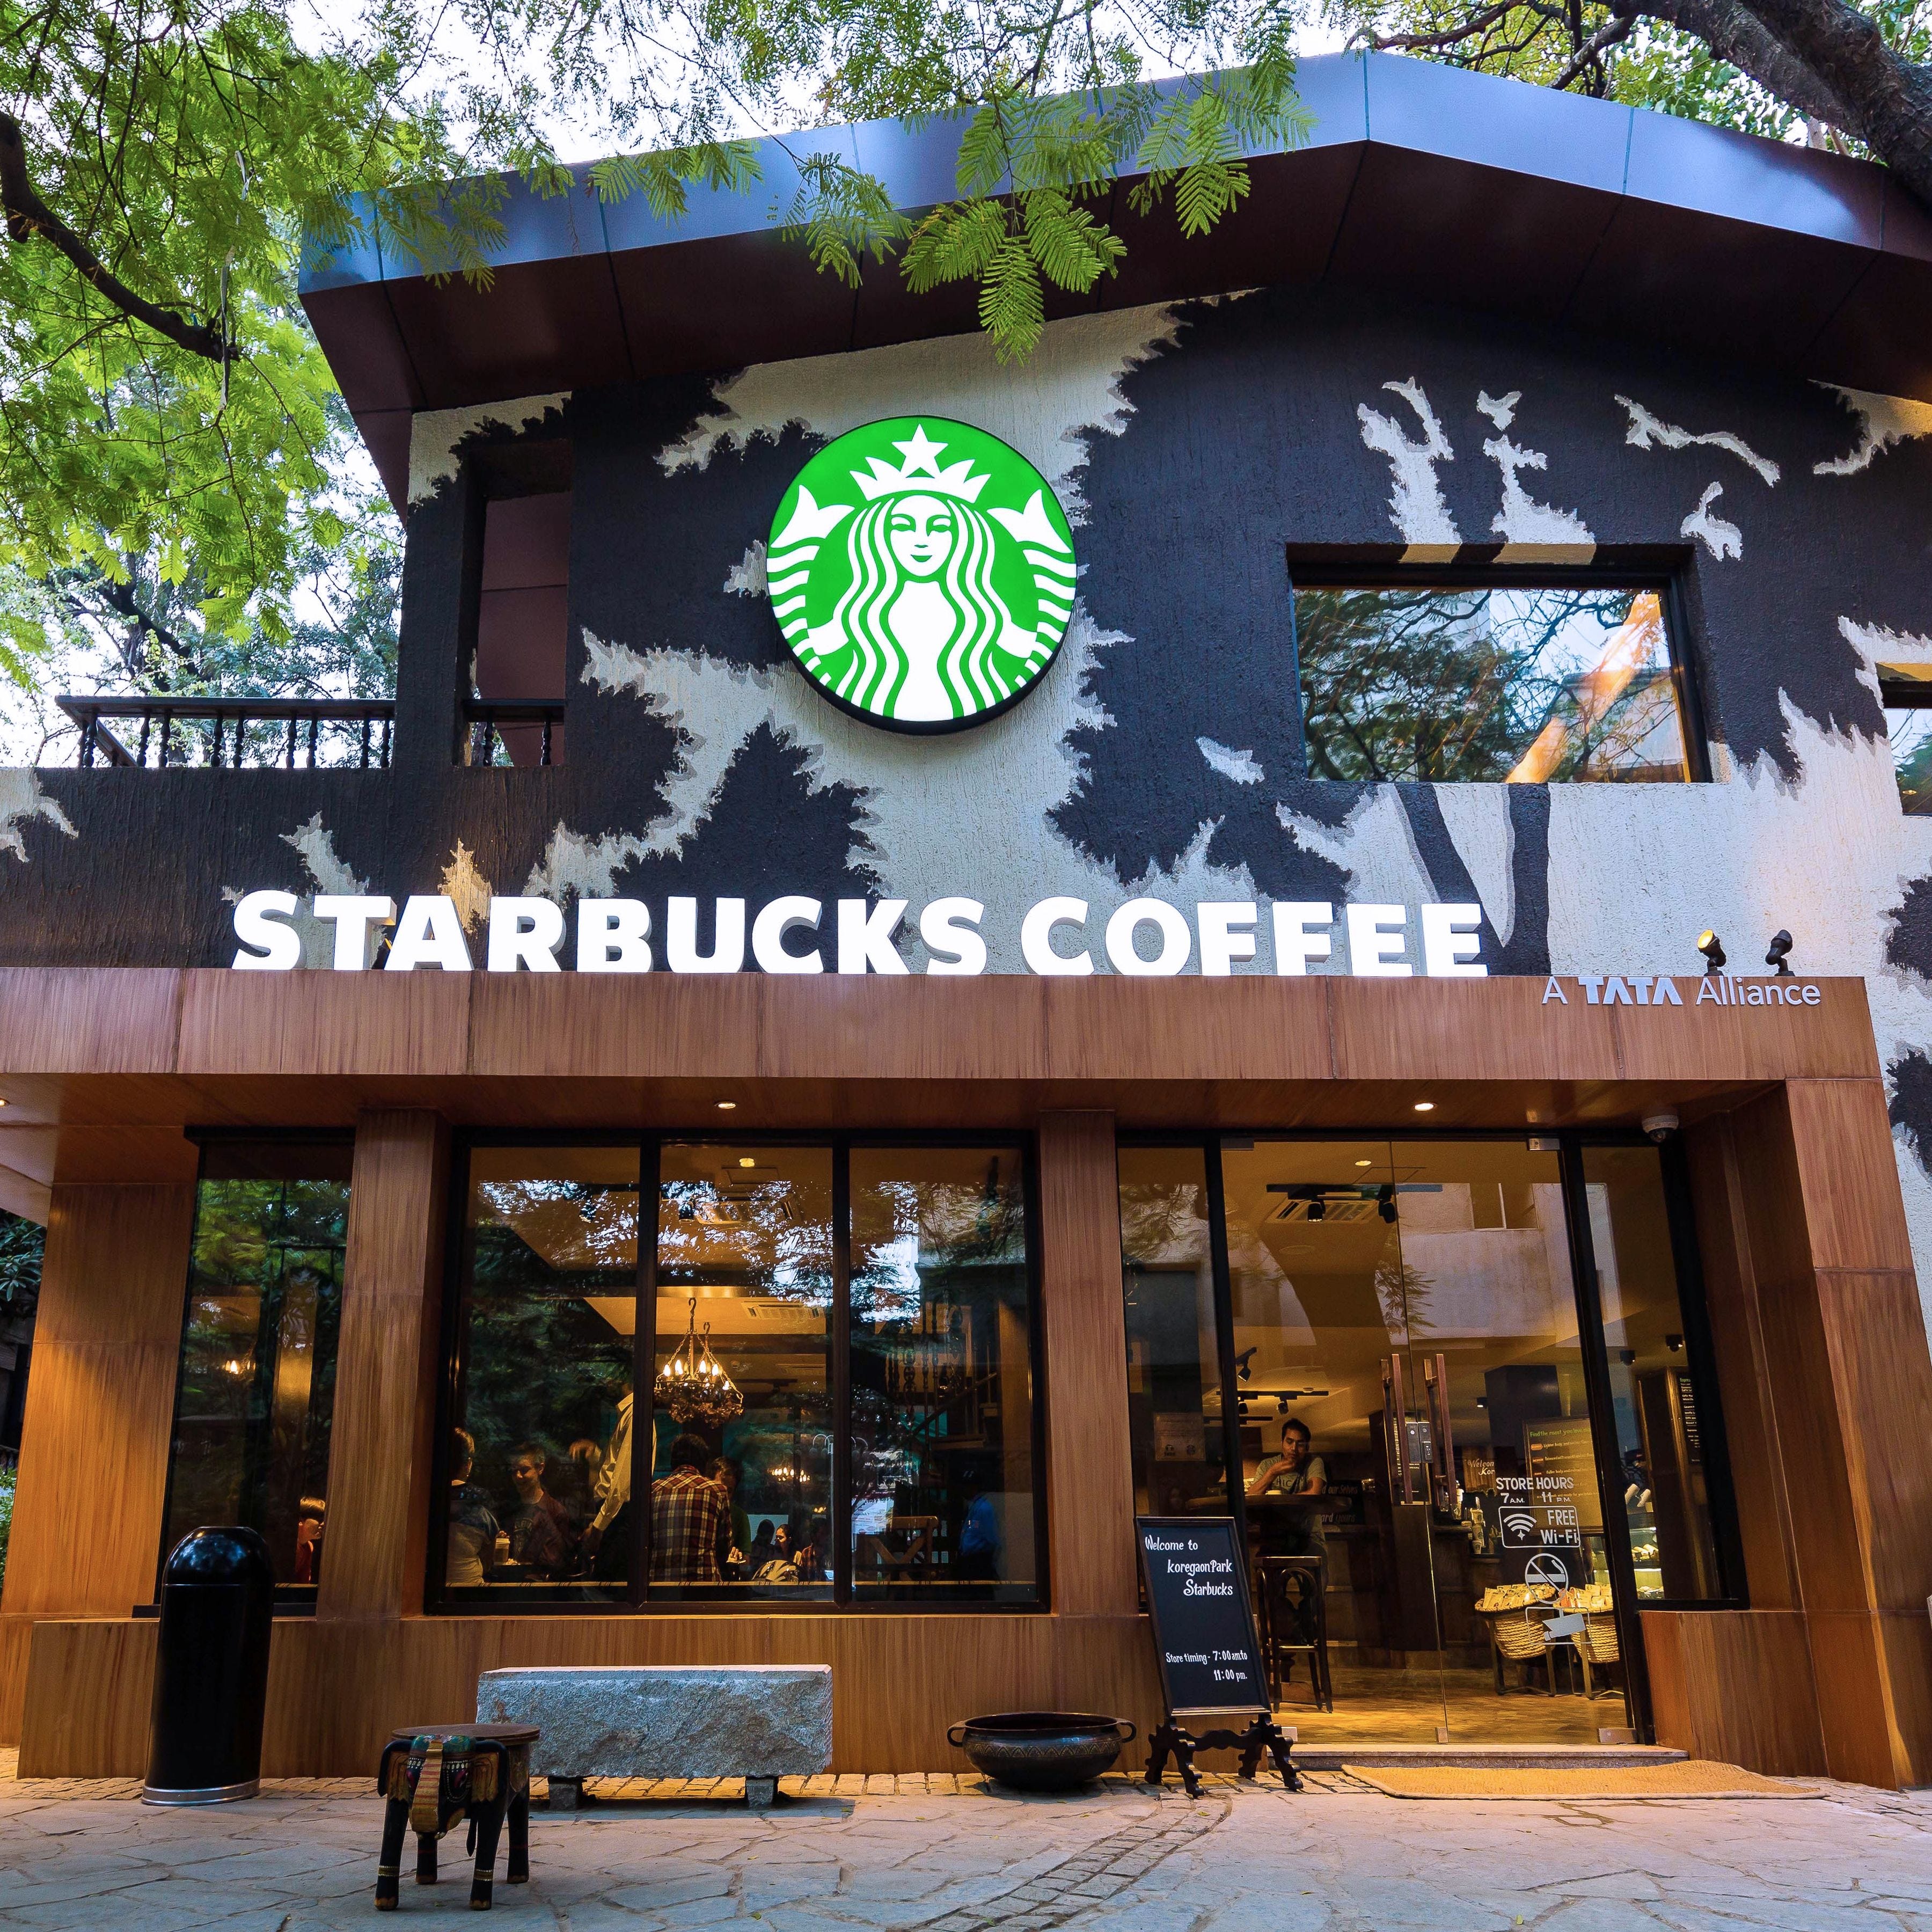 Is Starbucks Closing Stores In 2022? (All You Need To Know)